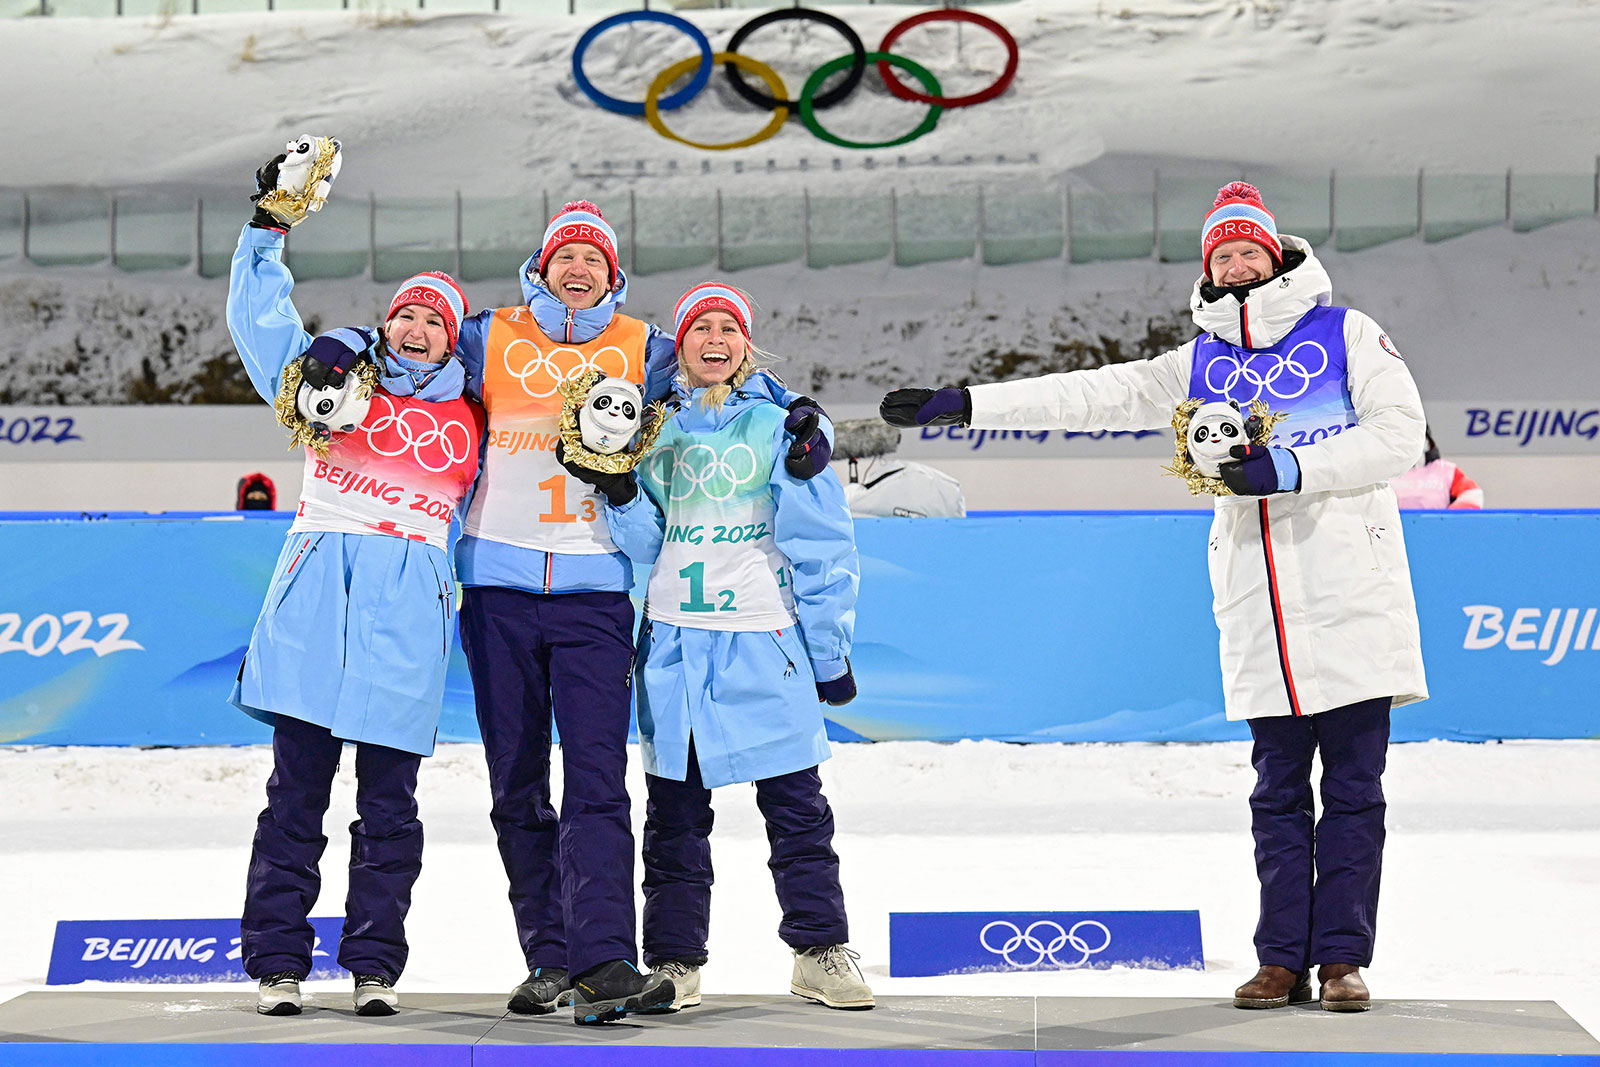 From left, Marte Olsbu Roeiseland, Johannes Thingnes Boe, Tiril Eckhoff and Tarjei Boe celebrate during the medal ceremony on Saturday.